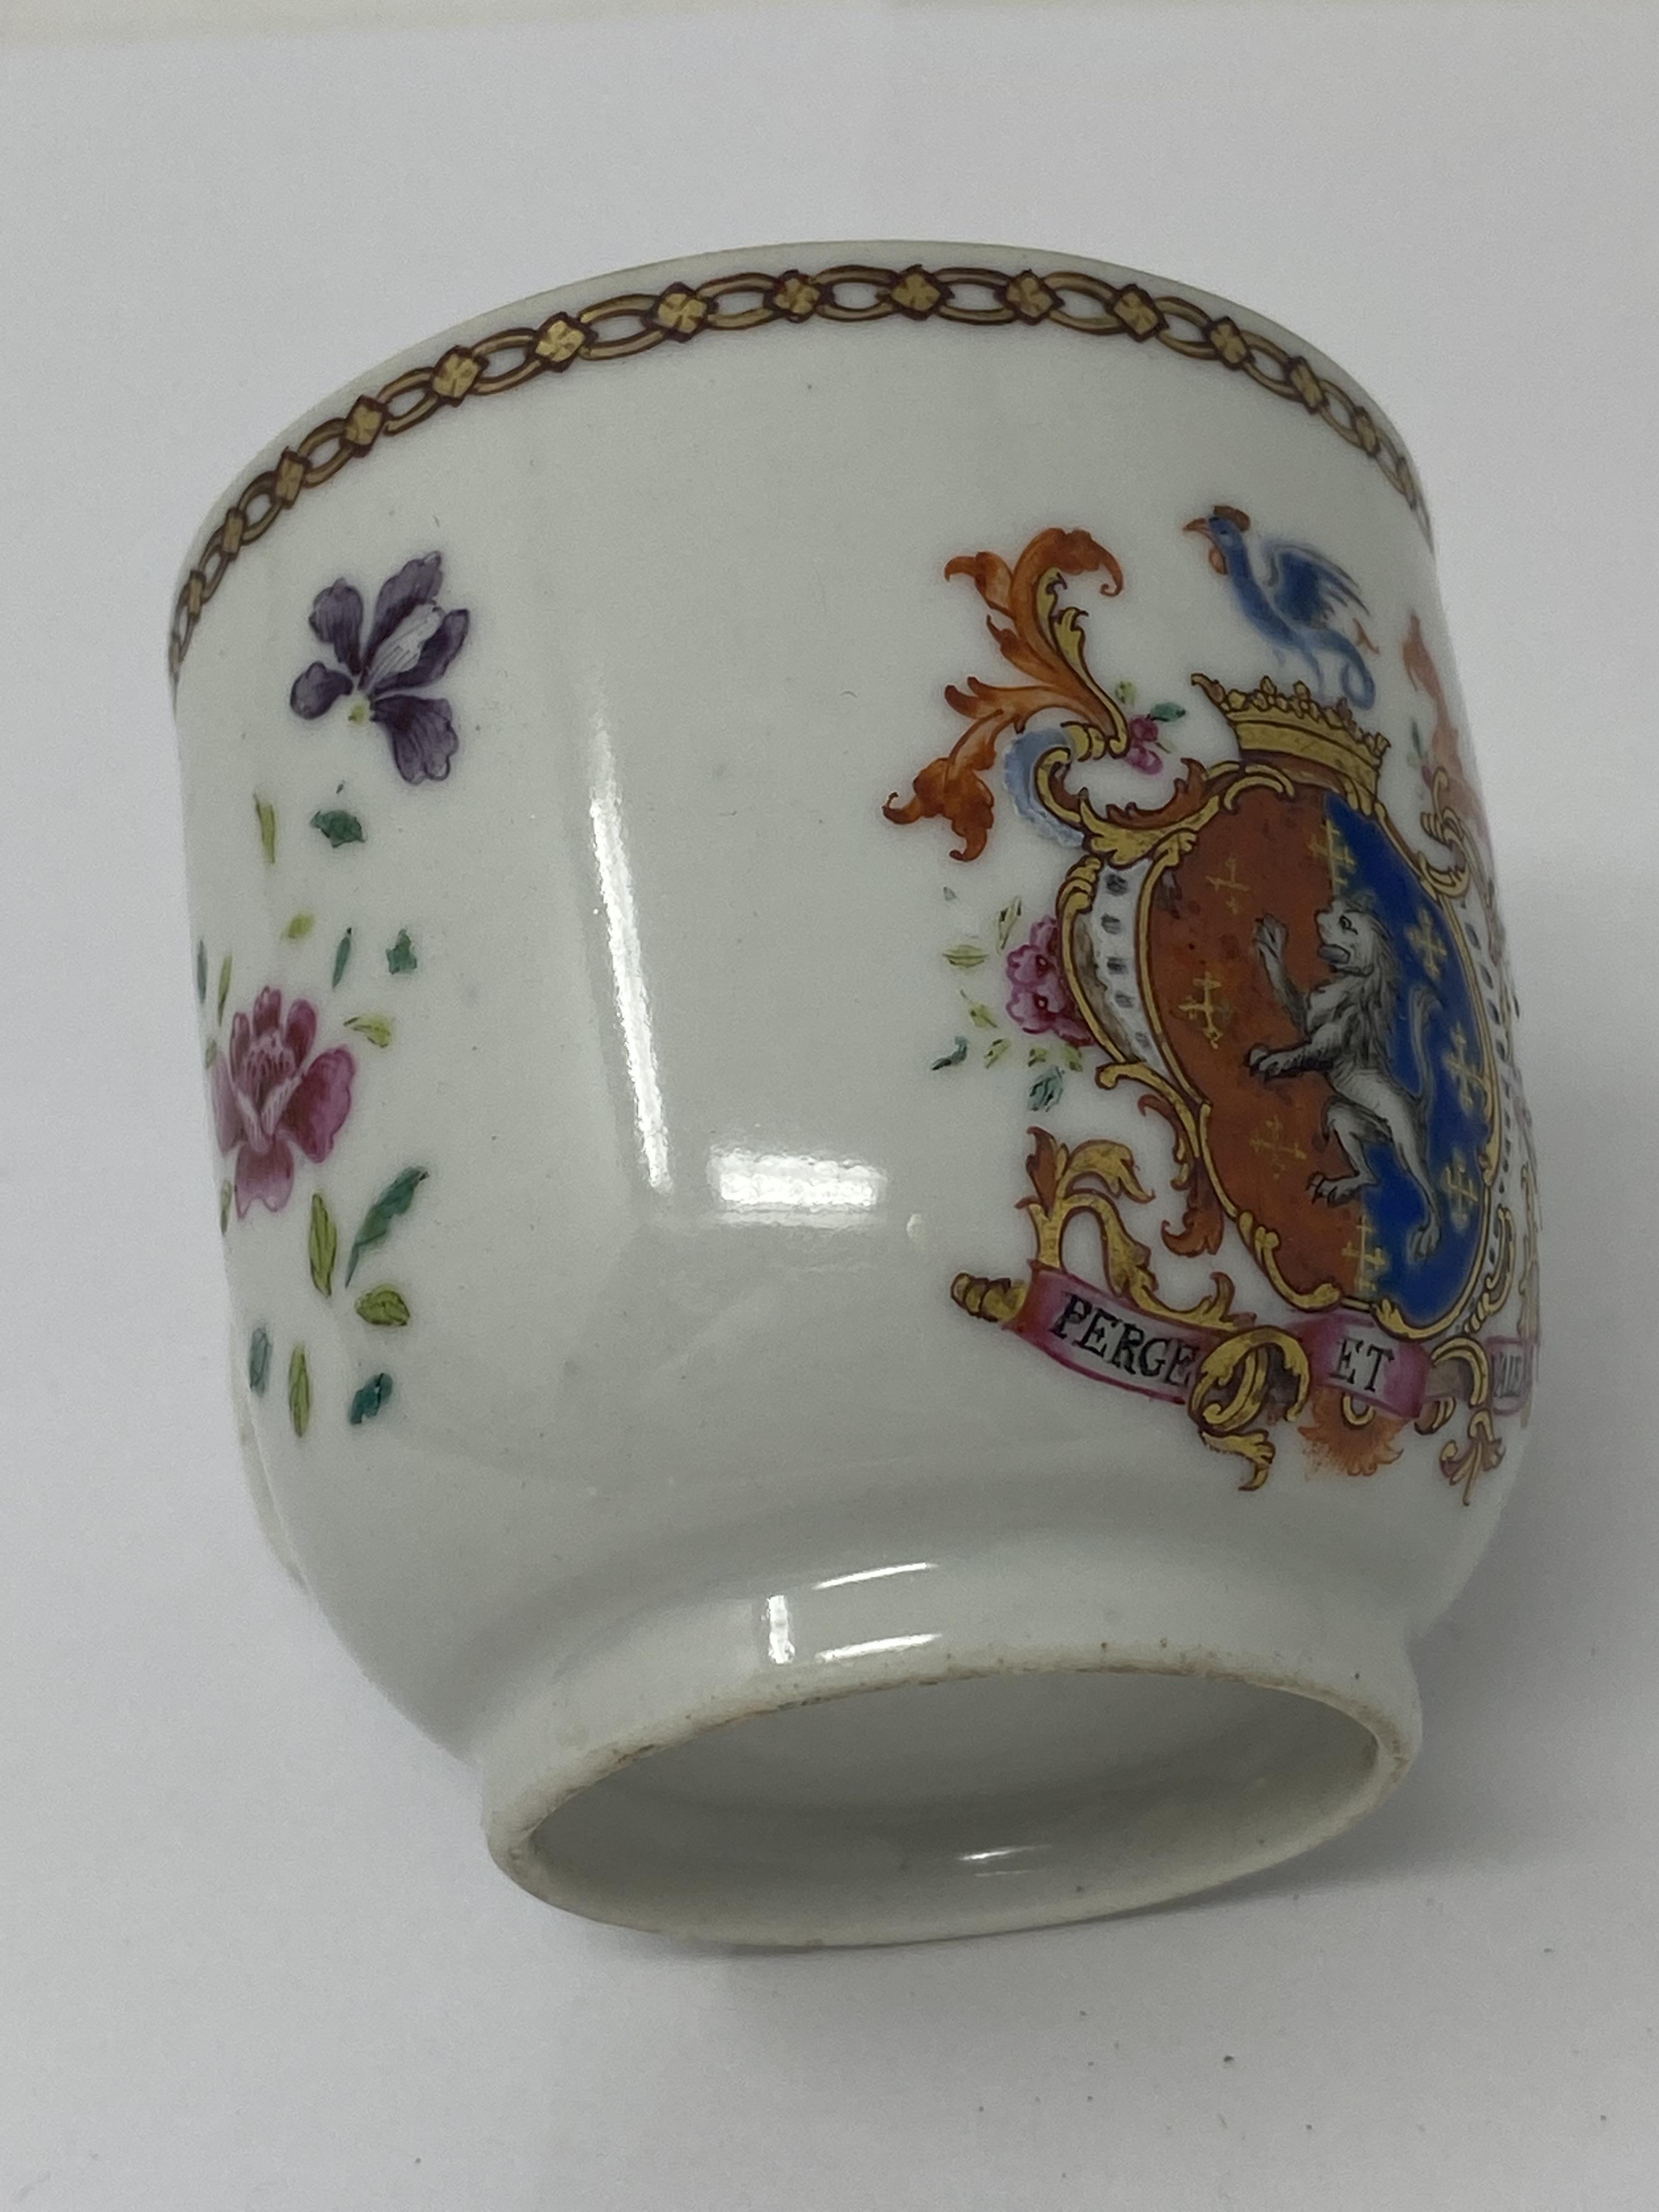 FOUR CHINESE EXPORT FAMILLE-ROSE ARMORIAL PORCELAINS, 18TH CENTURY - Image 5 of 13